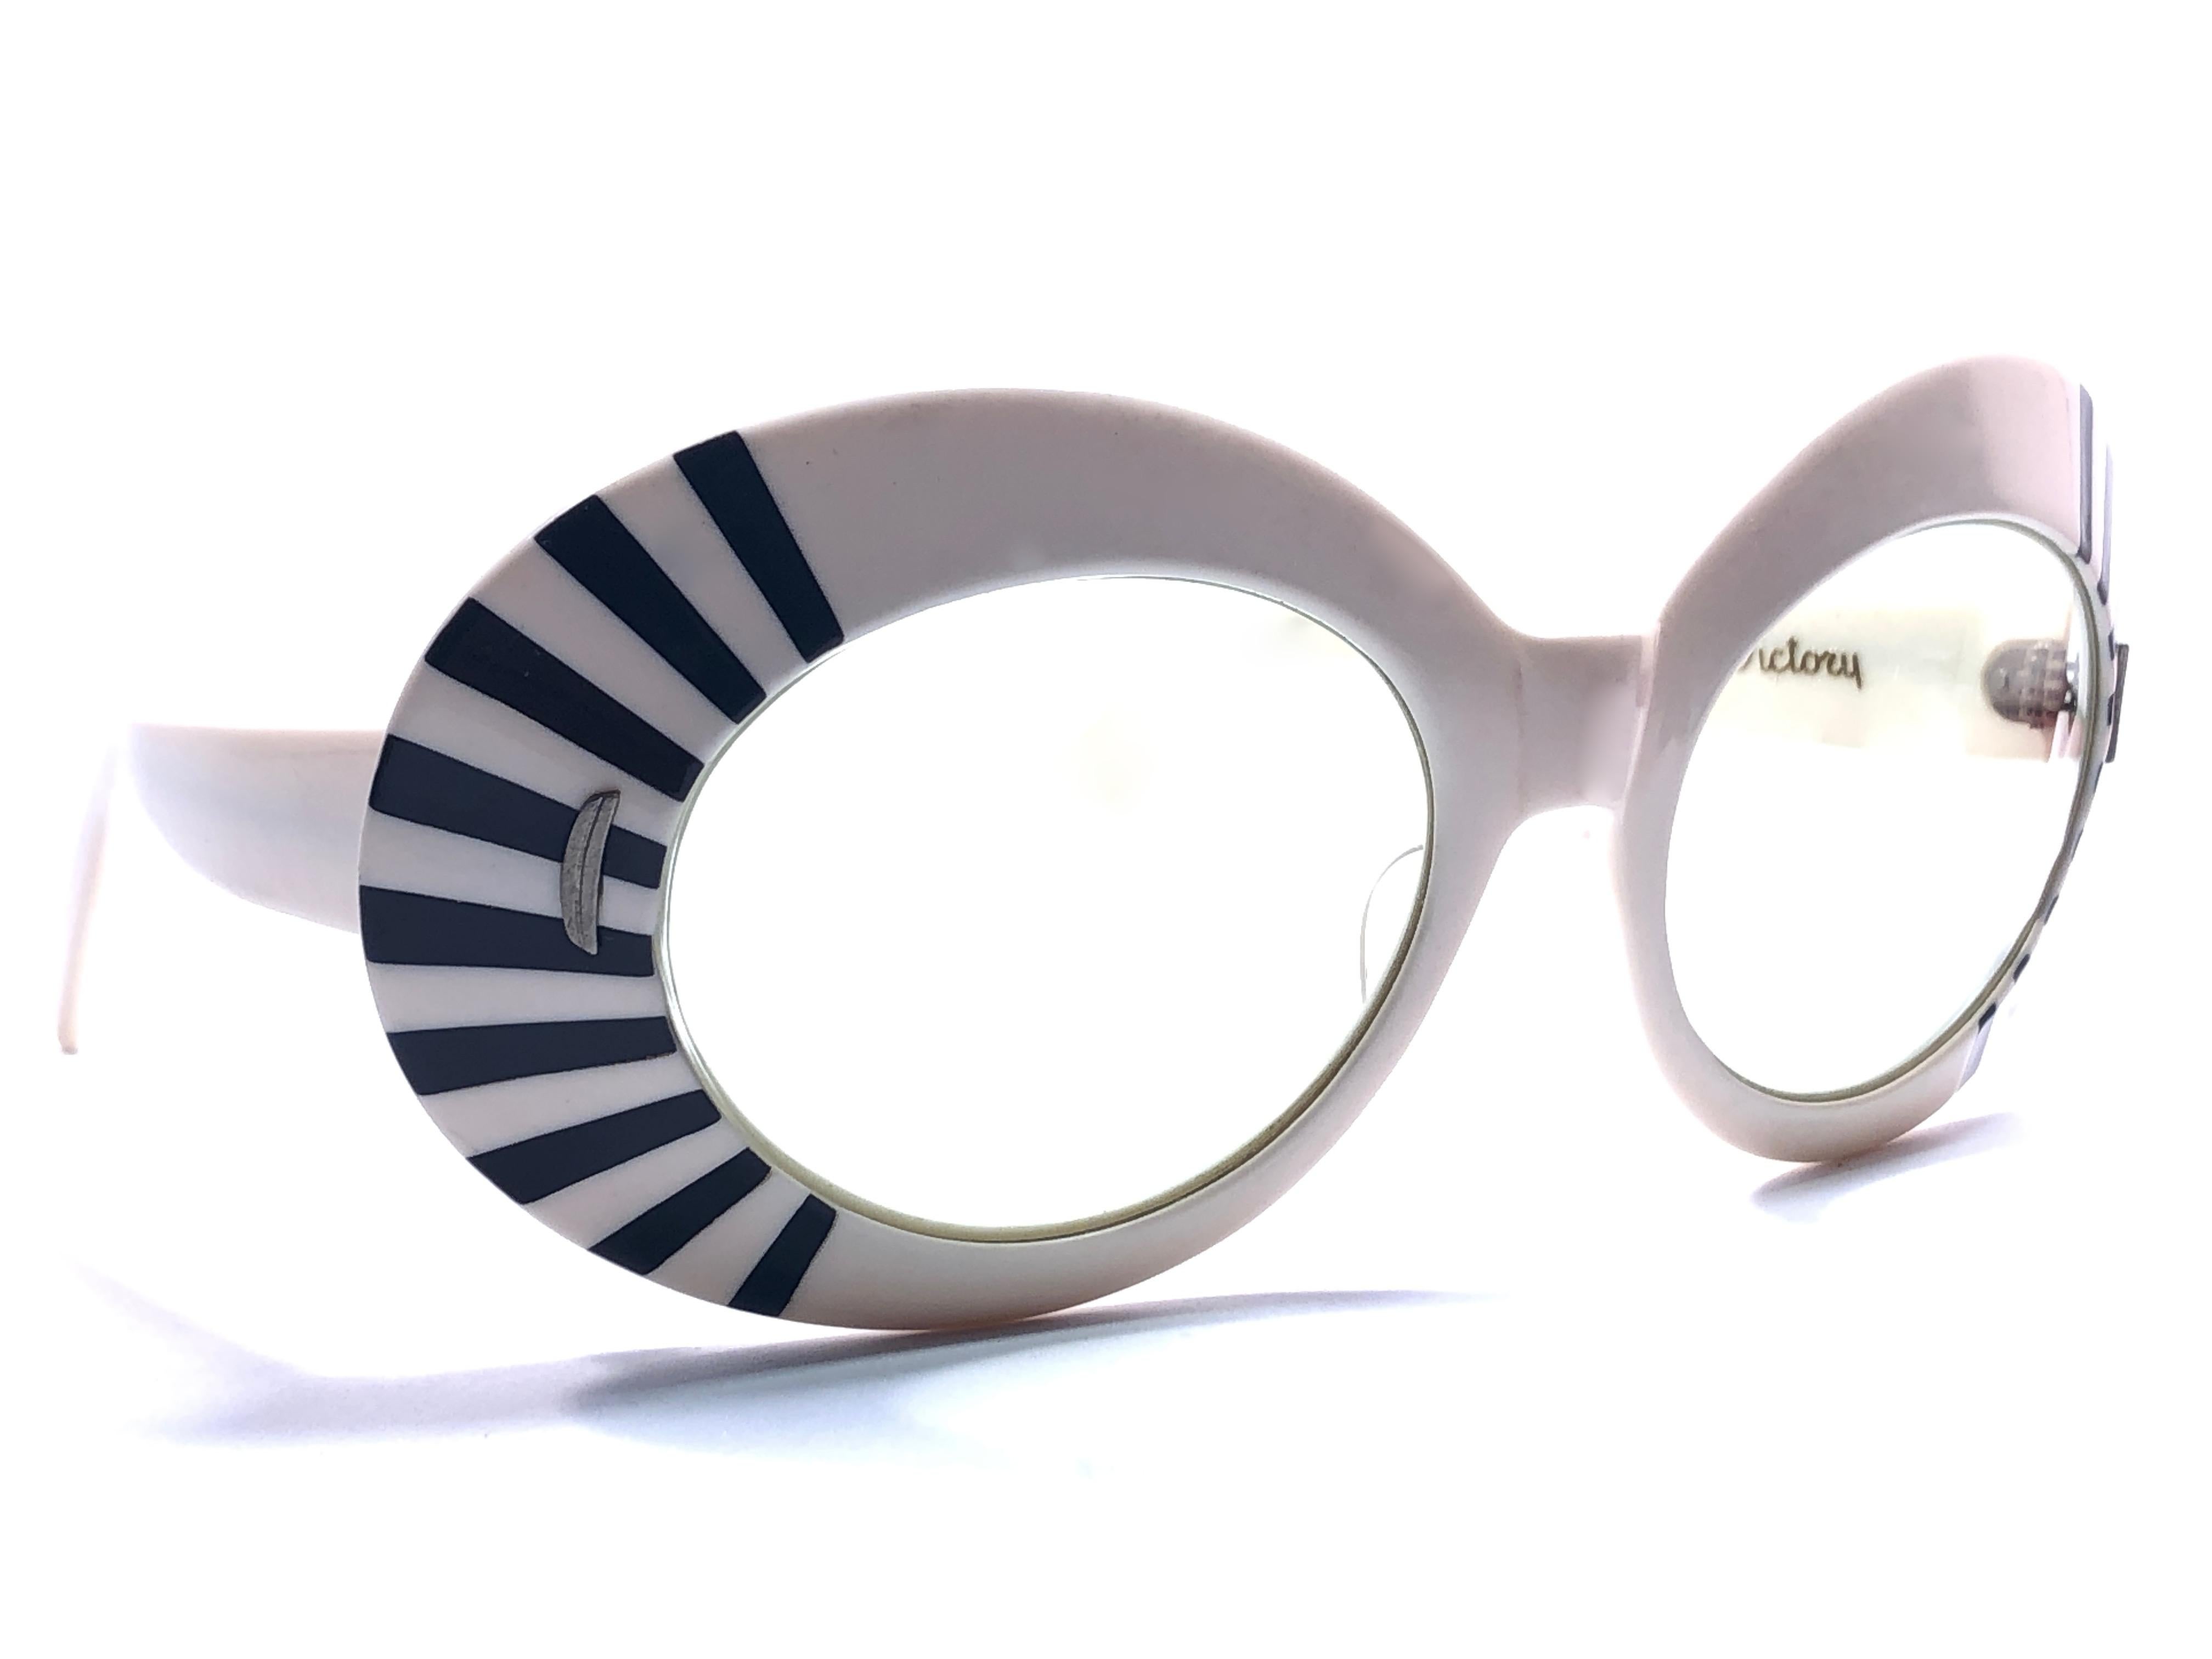 Mint Vintage Suntimer Victory Skimo style sunglasses. Iconic striped frame with G15 grey lenses.

Please notice this item its almost 60 years old and show minor sign of wear due to storage.

An original and seldom piece.